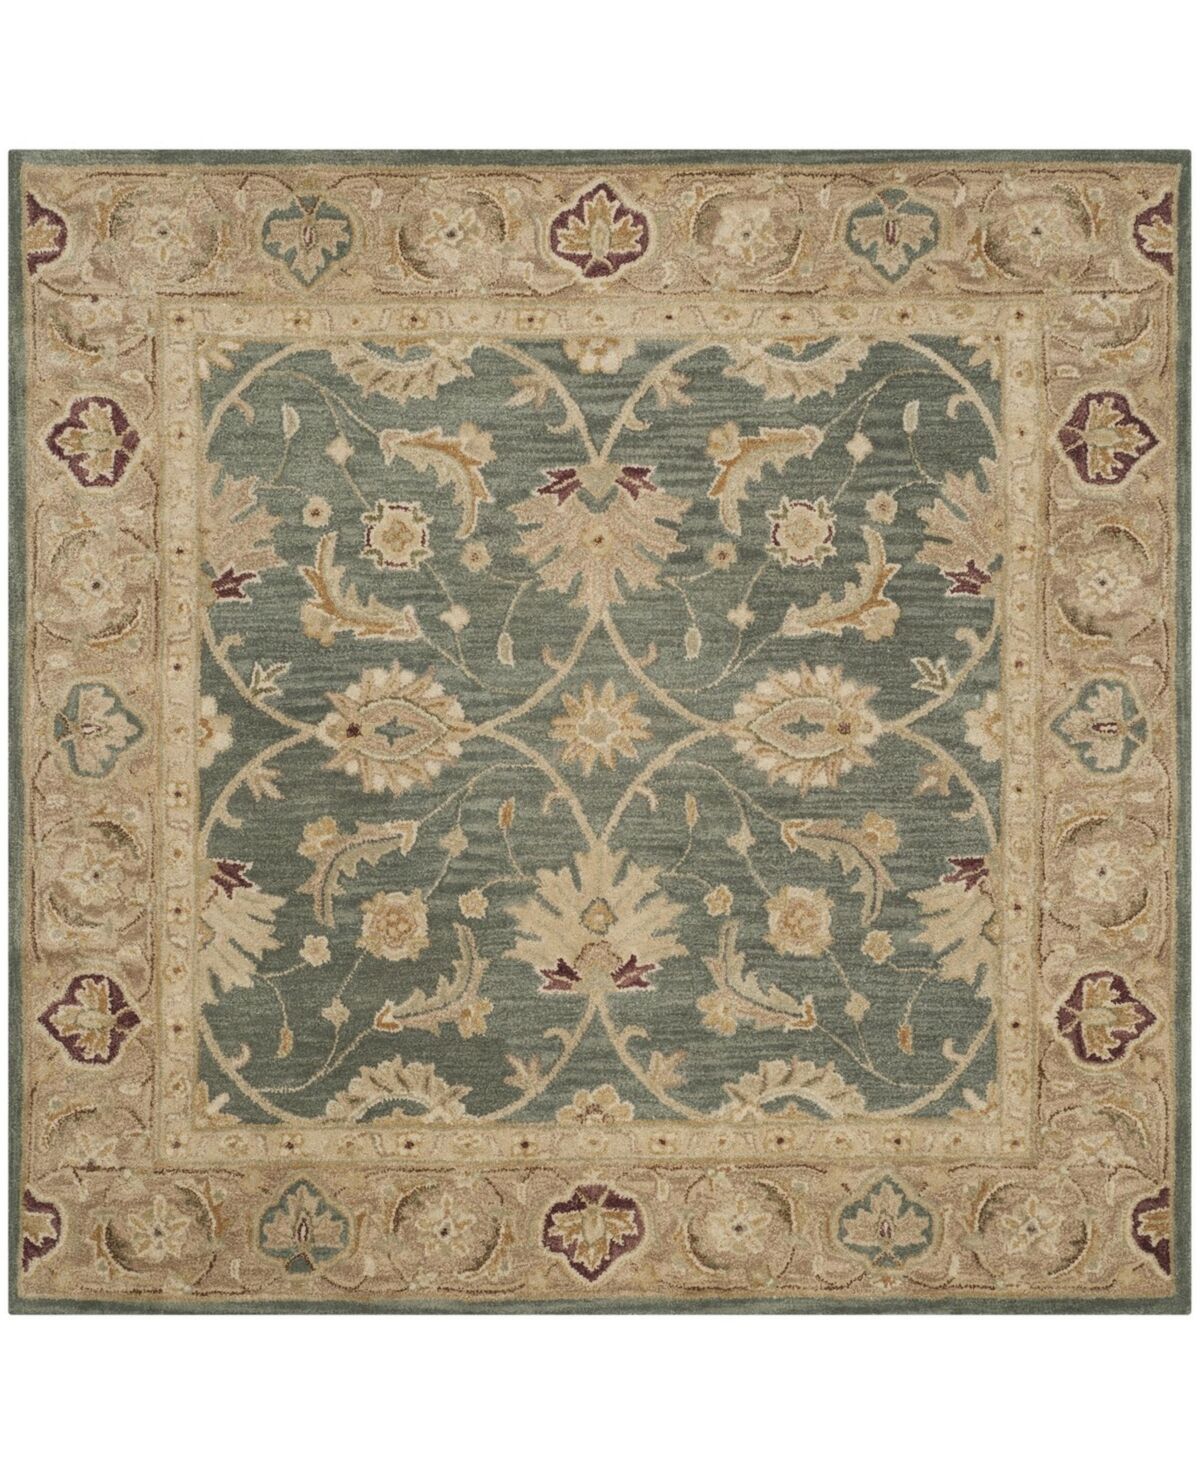 Safavieh Antiquity At849 Teal and Taupe 6' x 6' Square Area Rug - Teal